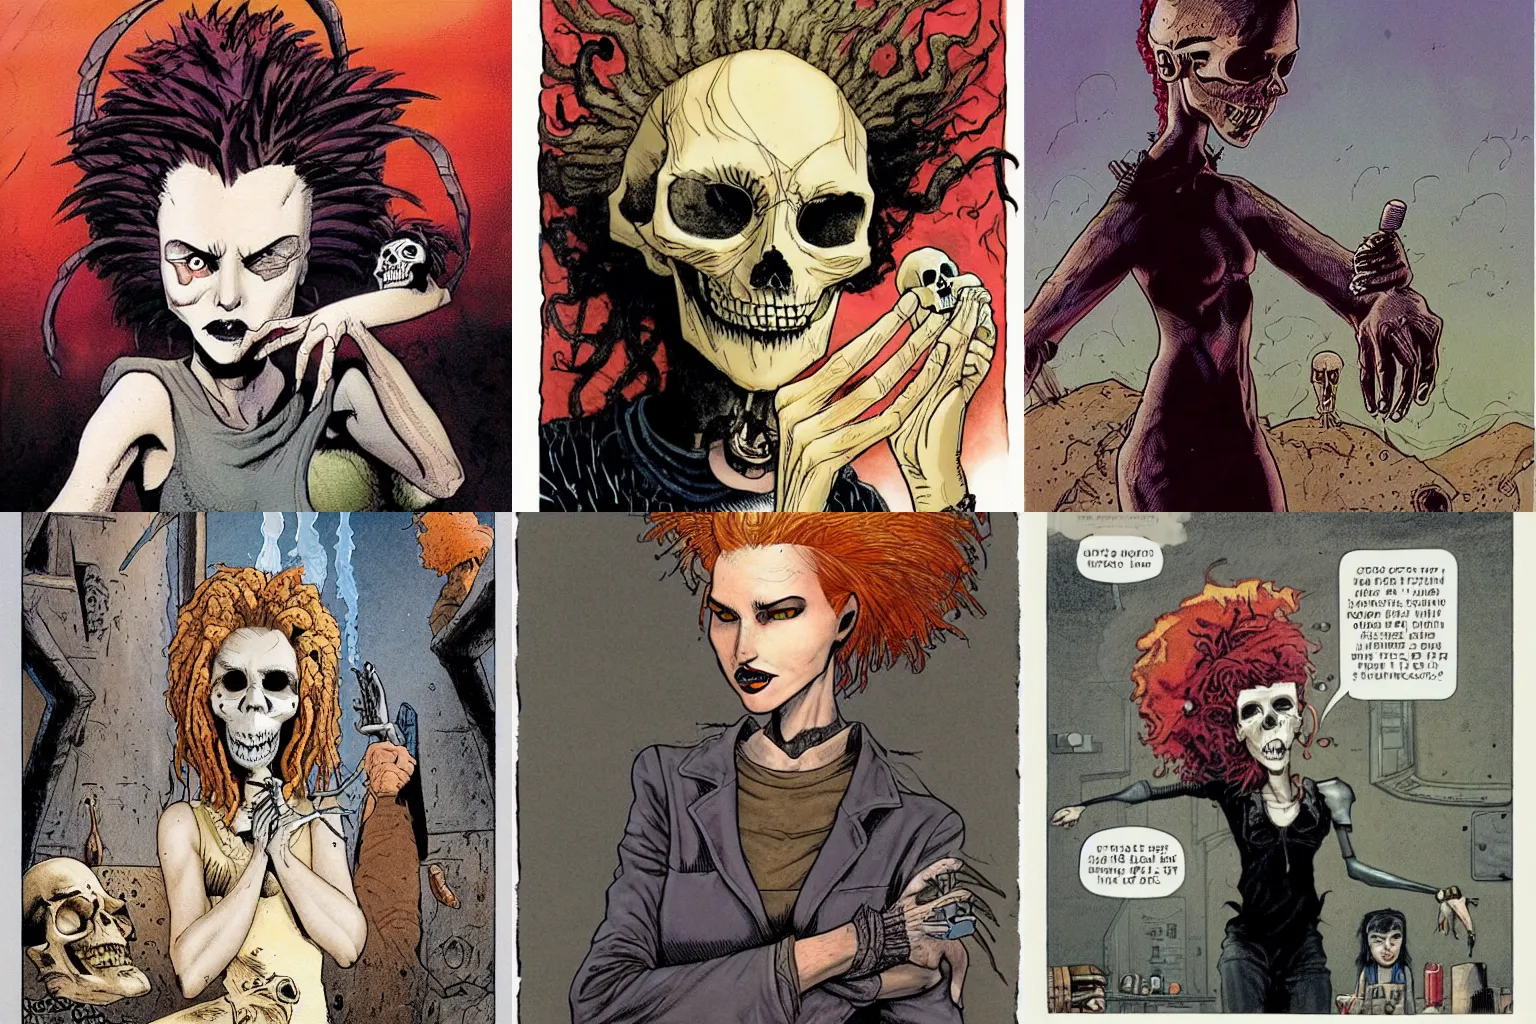 Prompt: A which with crazy hair stare at a skull in her hand. By Régis Loisel and Enki Bilal